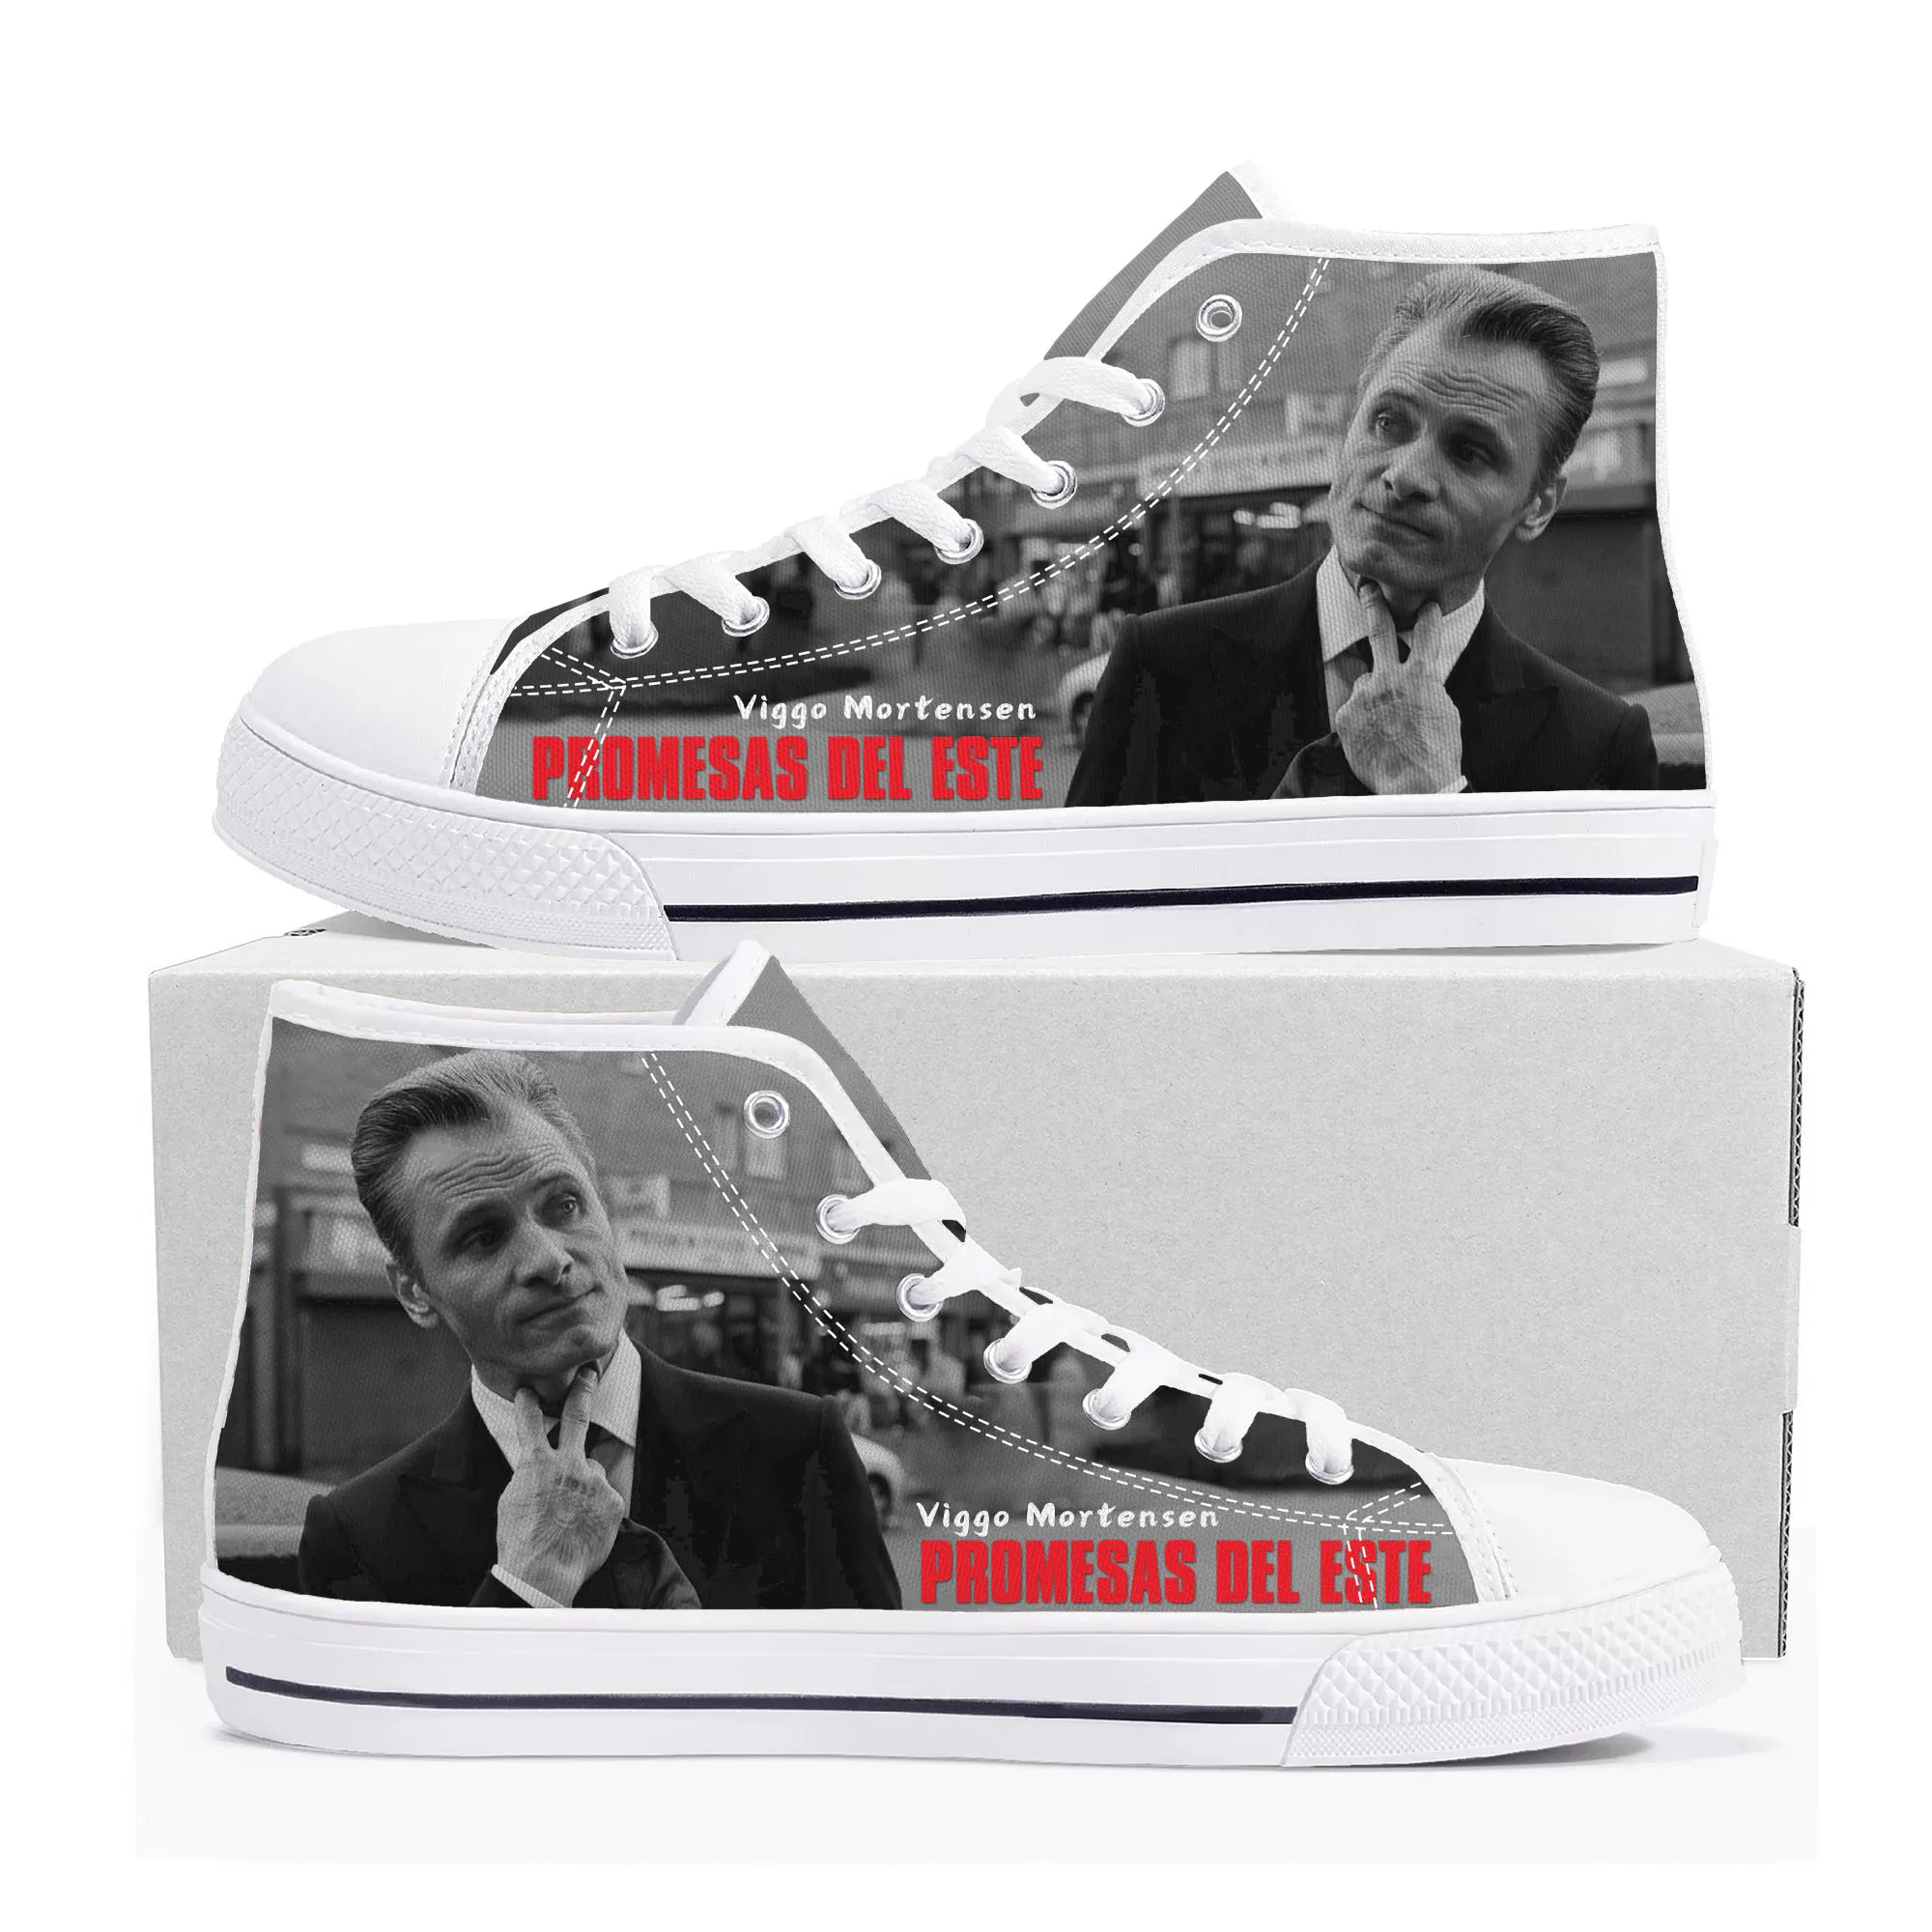 

Eastern Promises High Top Sneakers Mens Womens Teenager High Quality Viggo Mortensen Canvas Sneaker Casual Shoe Customize Shoes